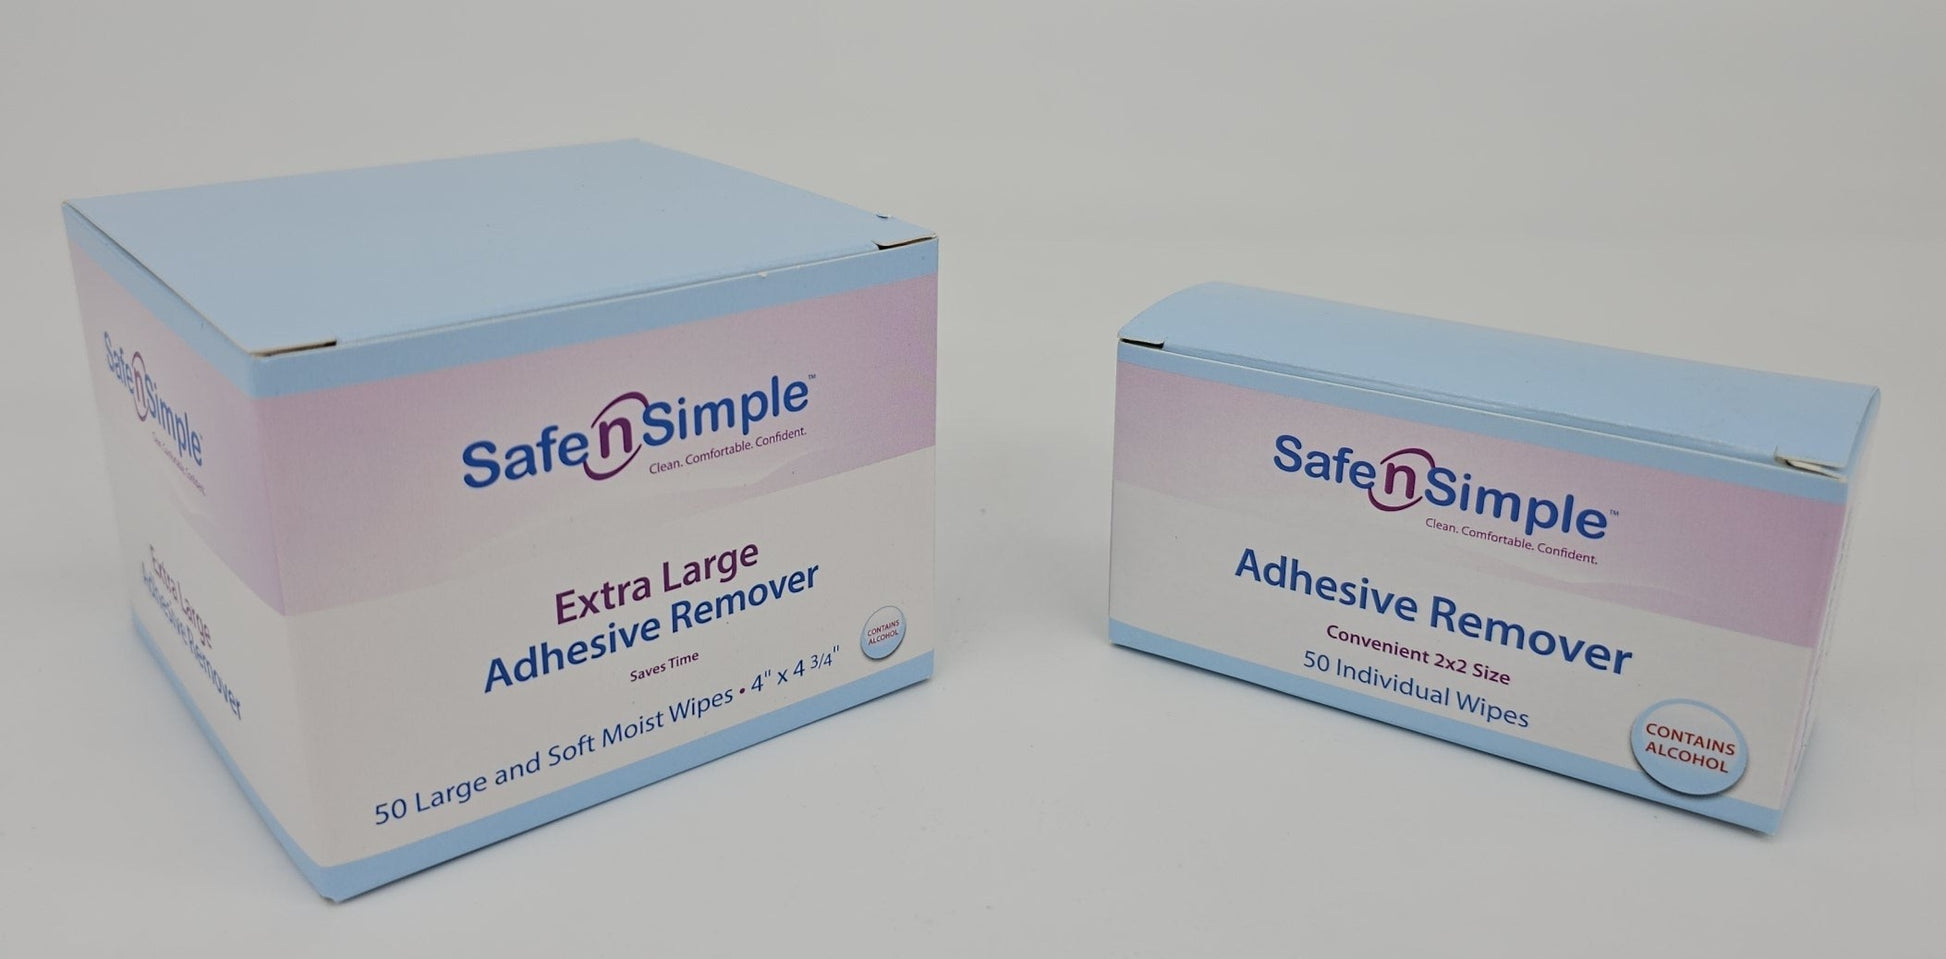 Safe n' Simple Adhesive Remover Wipes - 50 Large No-Sting Skin